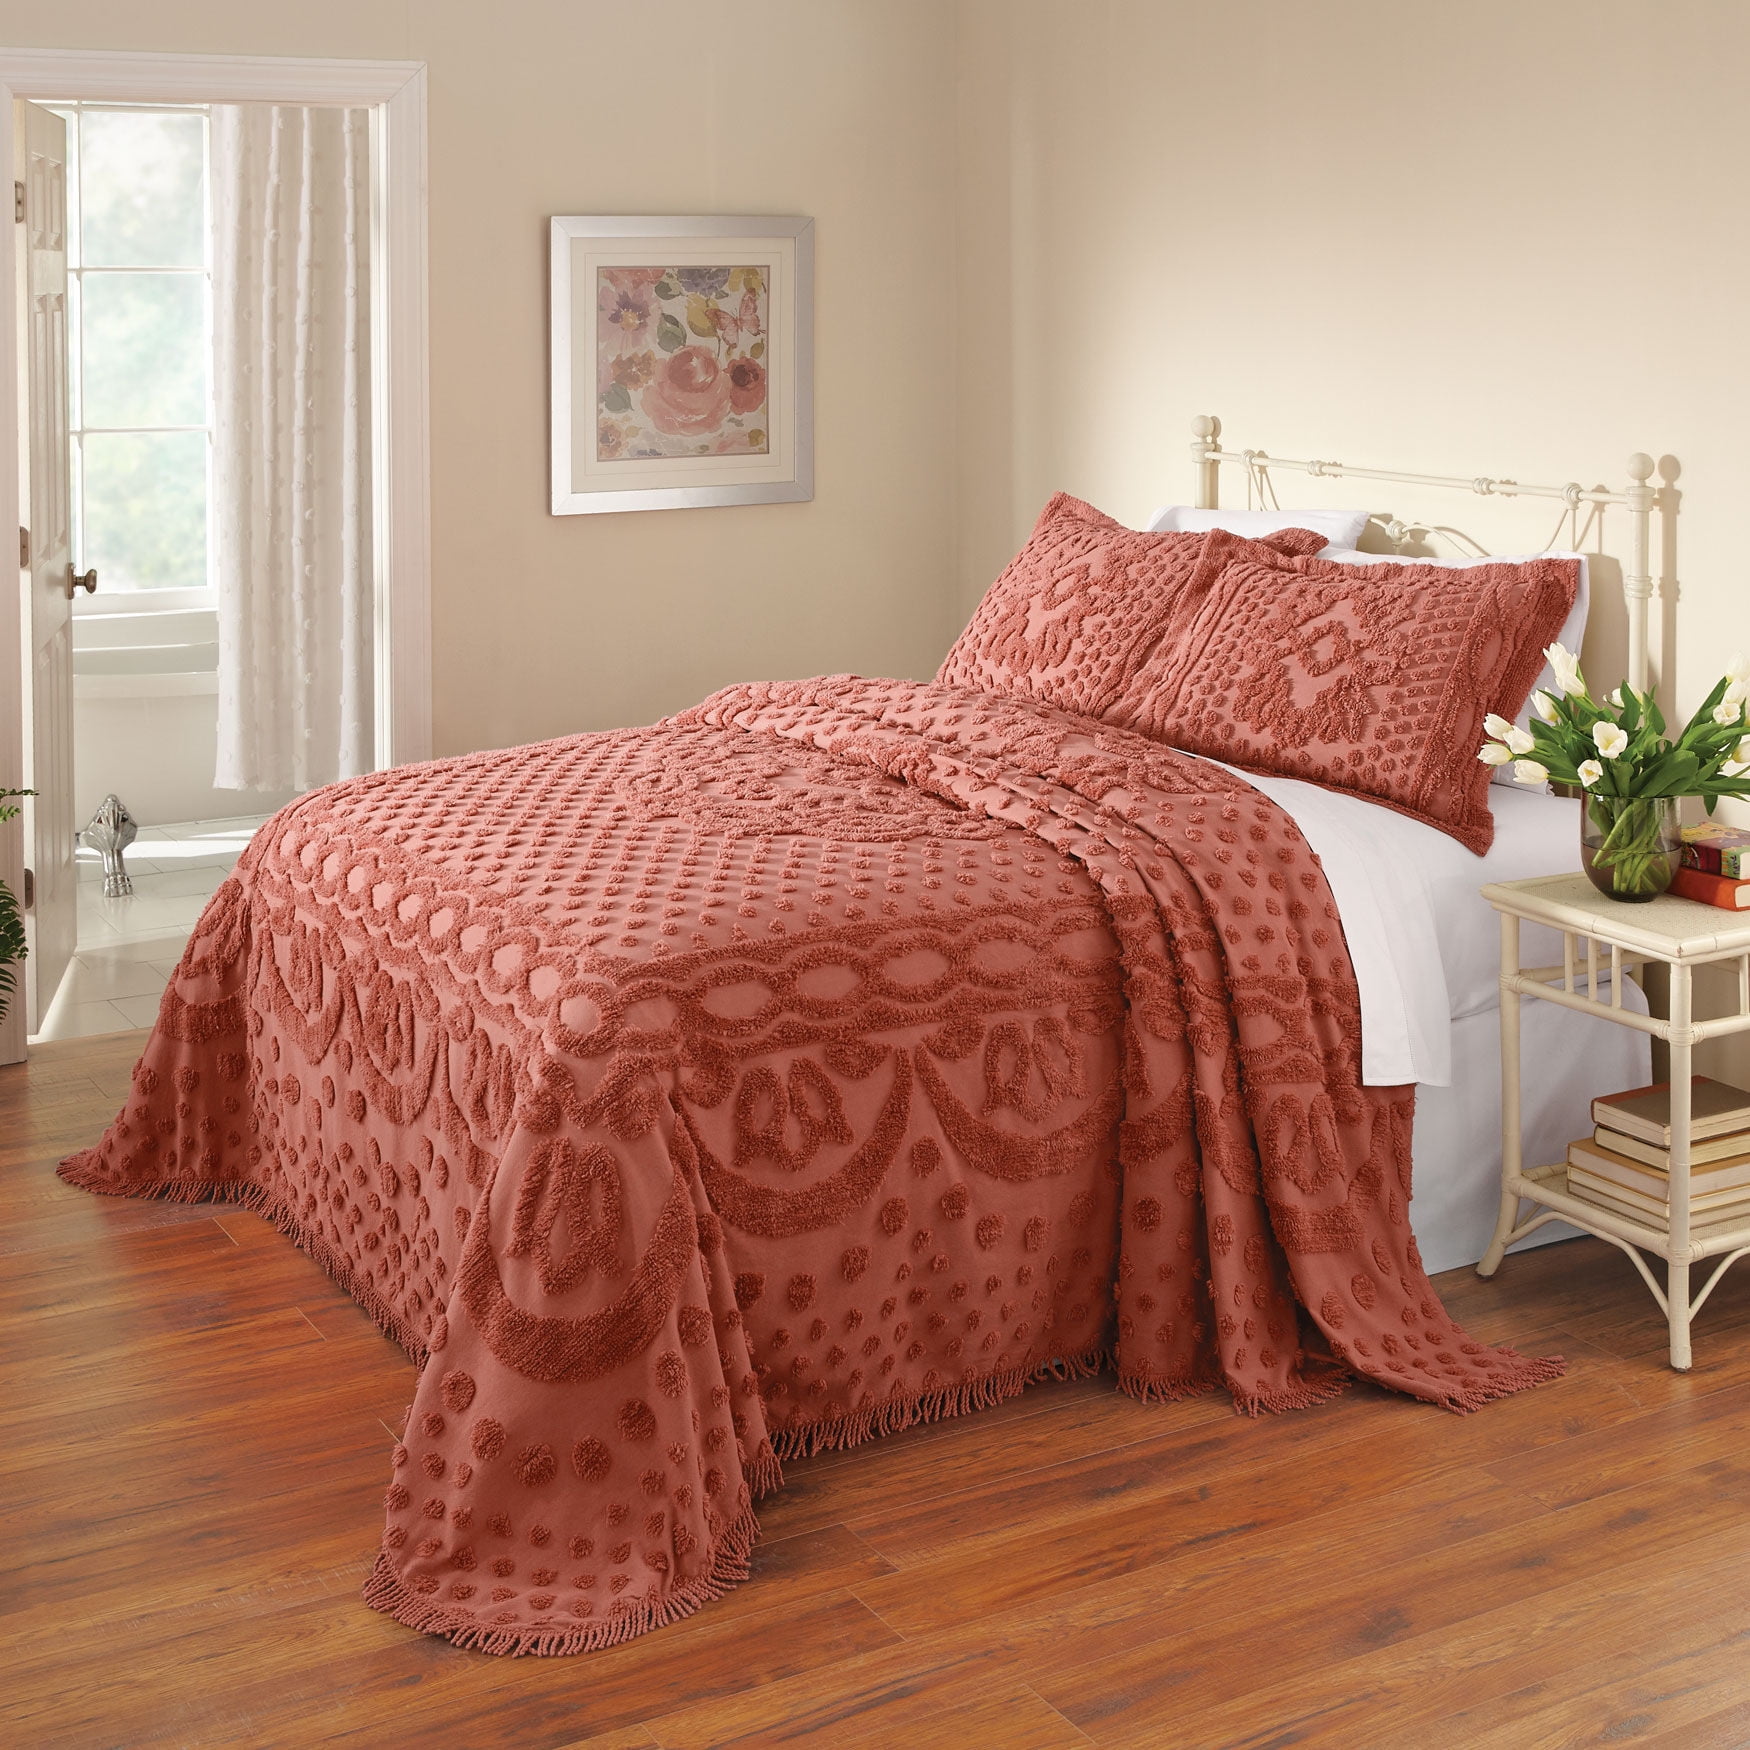 BrylaneHome Georgia Chenille Bedspread Ultra-Soft 100% Cotton with  Medallion Pattern - TWIN, Gold